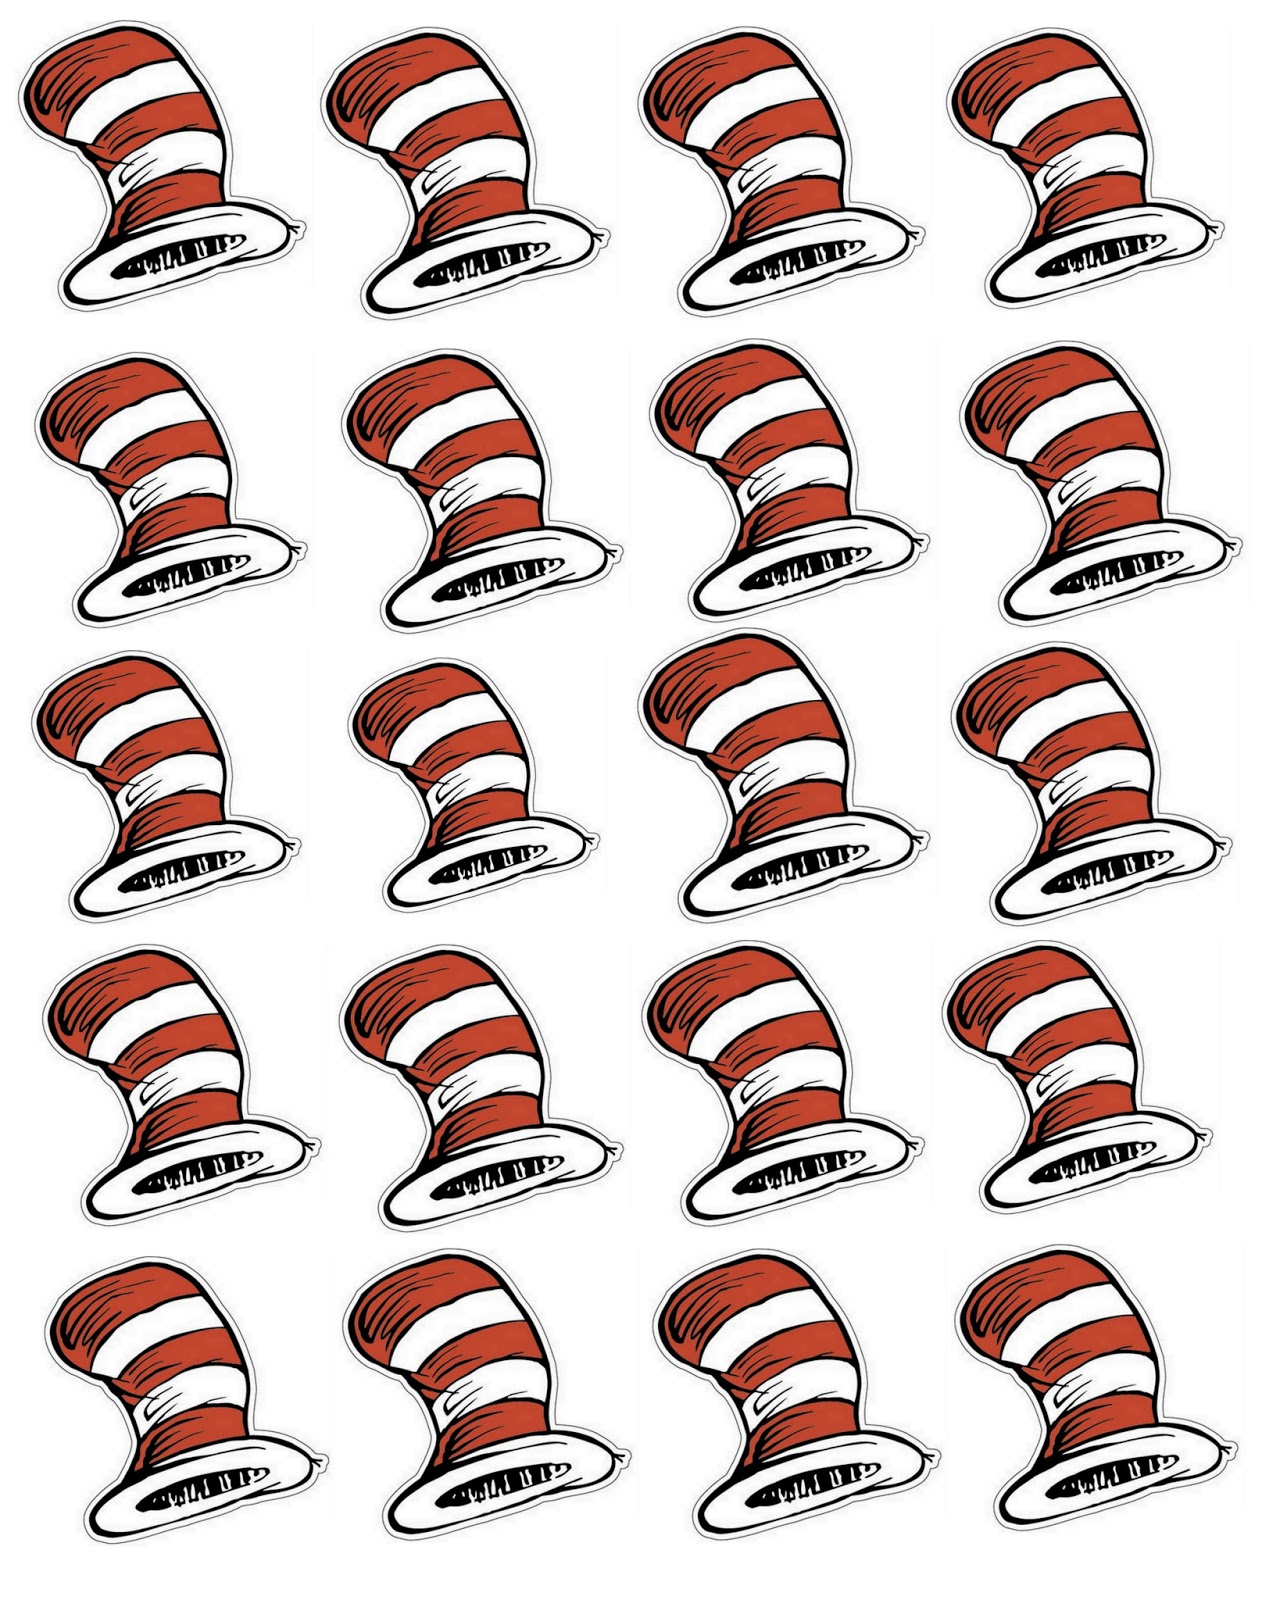 Cat in the hat dr seuss chara